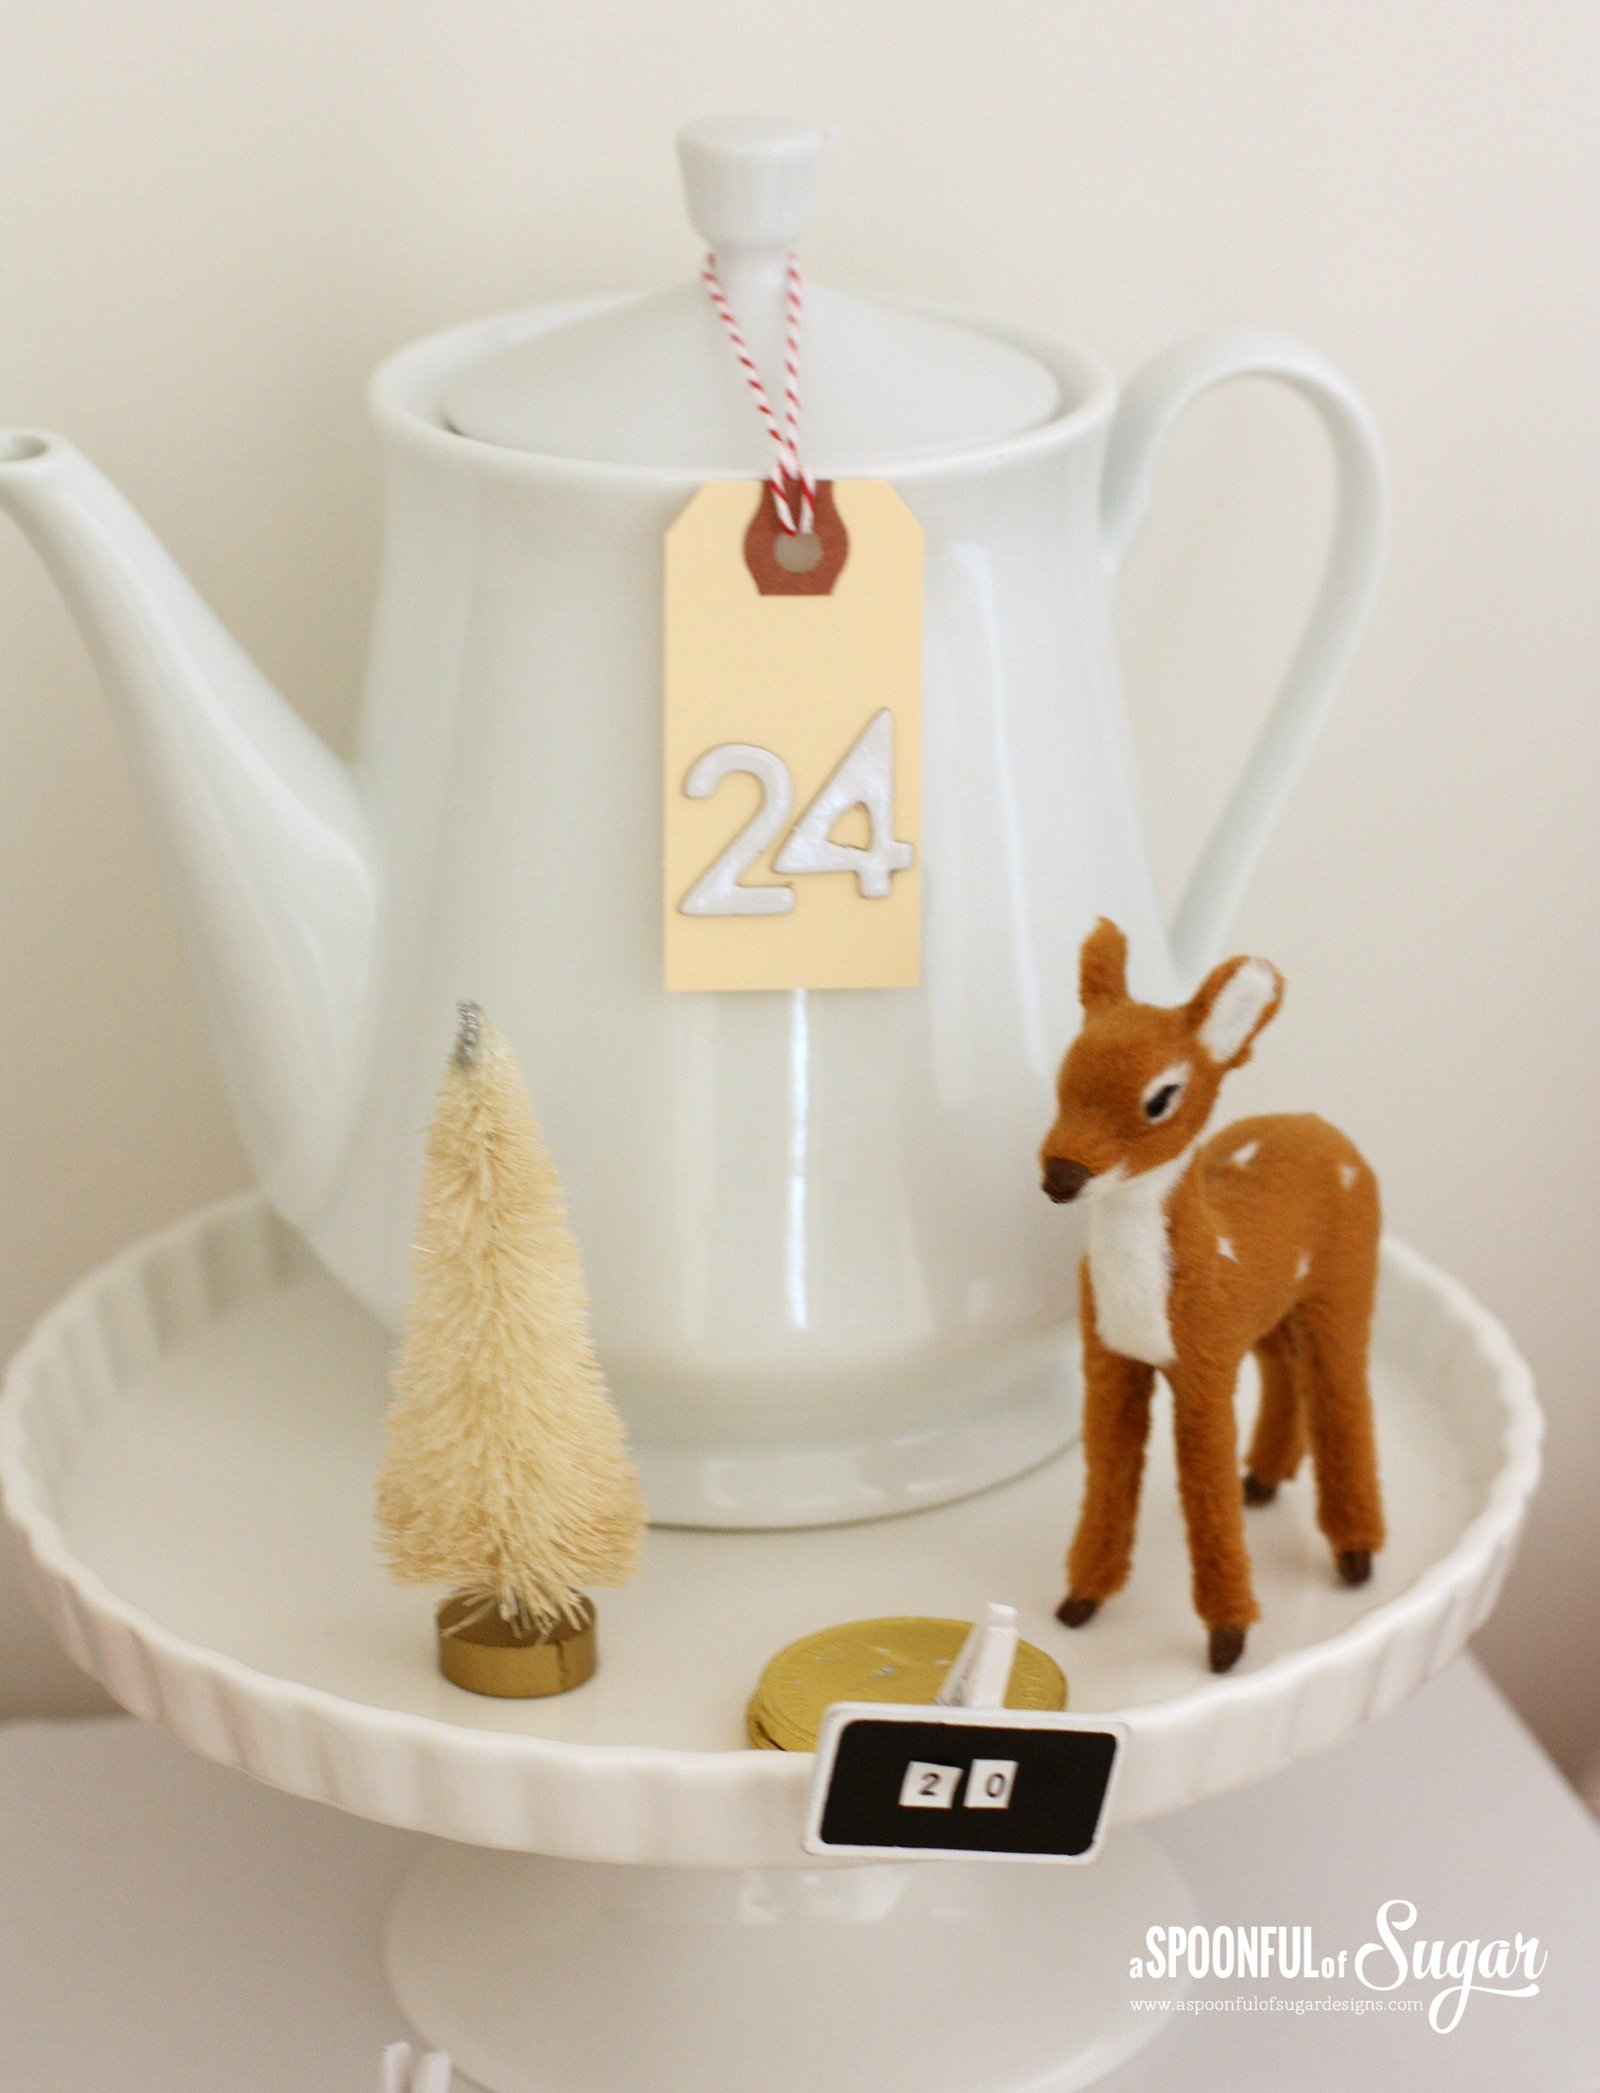 Advent countdown using assorted kitchenware. More details at www.aspoonfulofsugardesigns.com